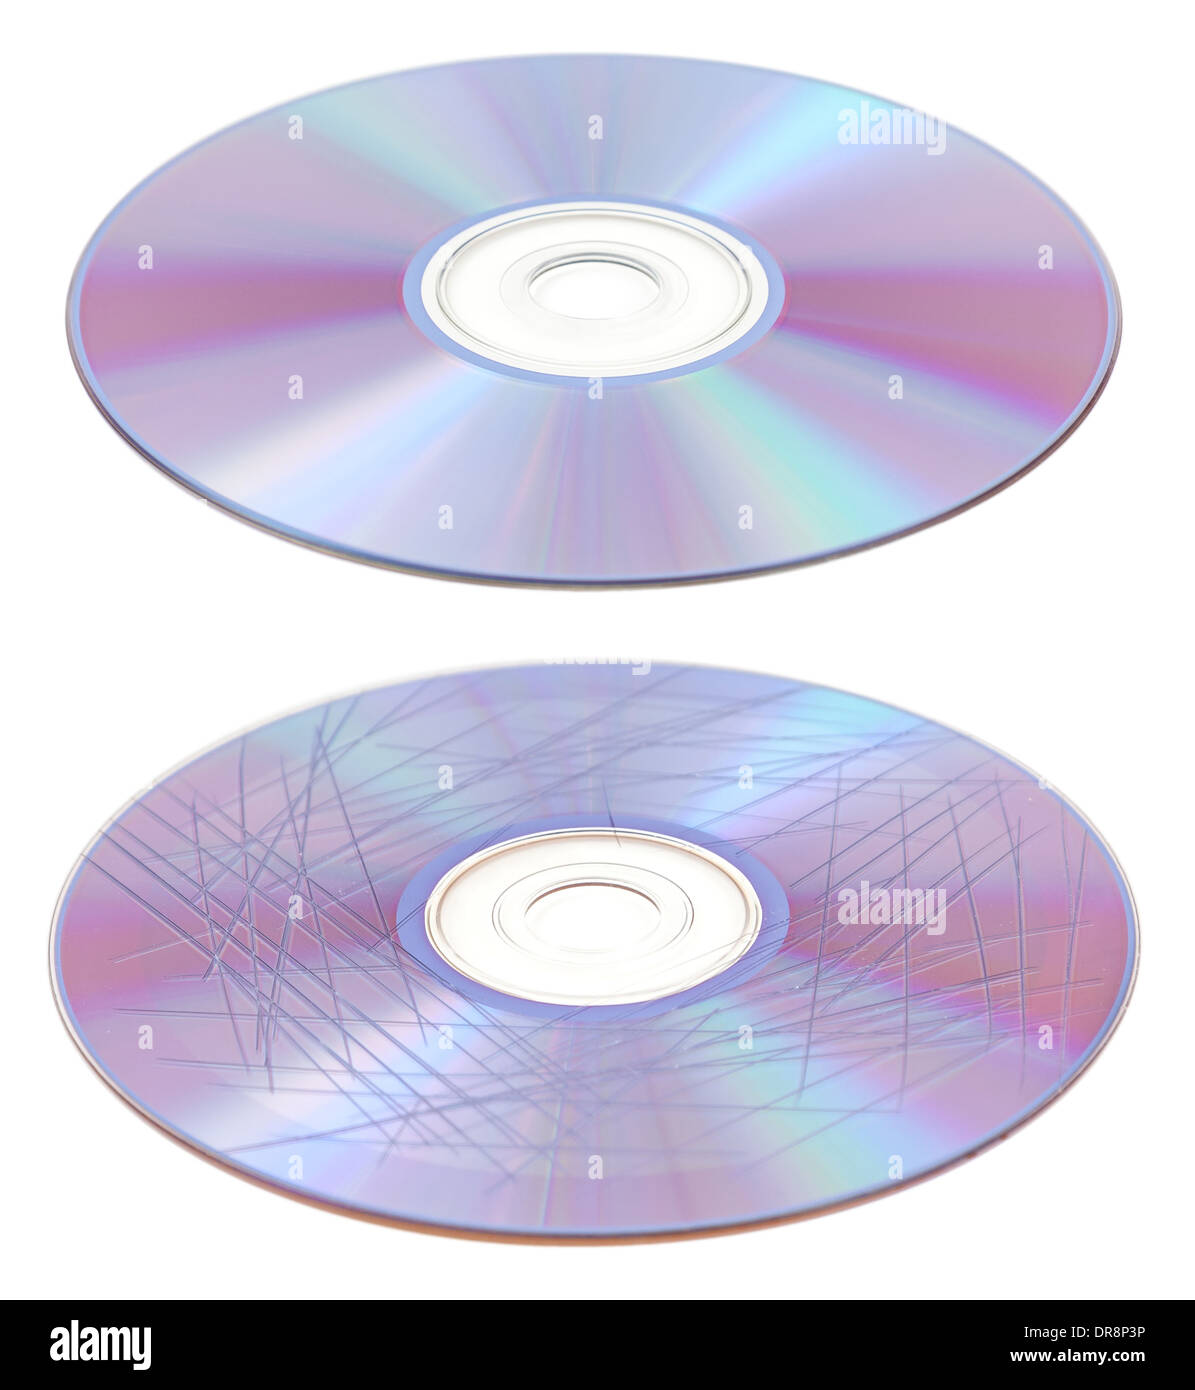 Scratched and clean cd of dvd disc isolated to white background Stock Photo